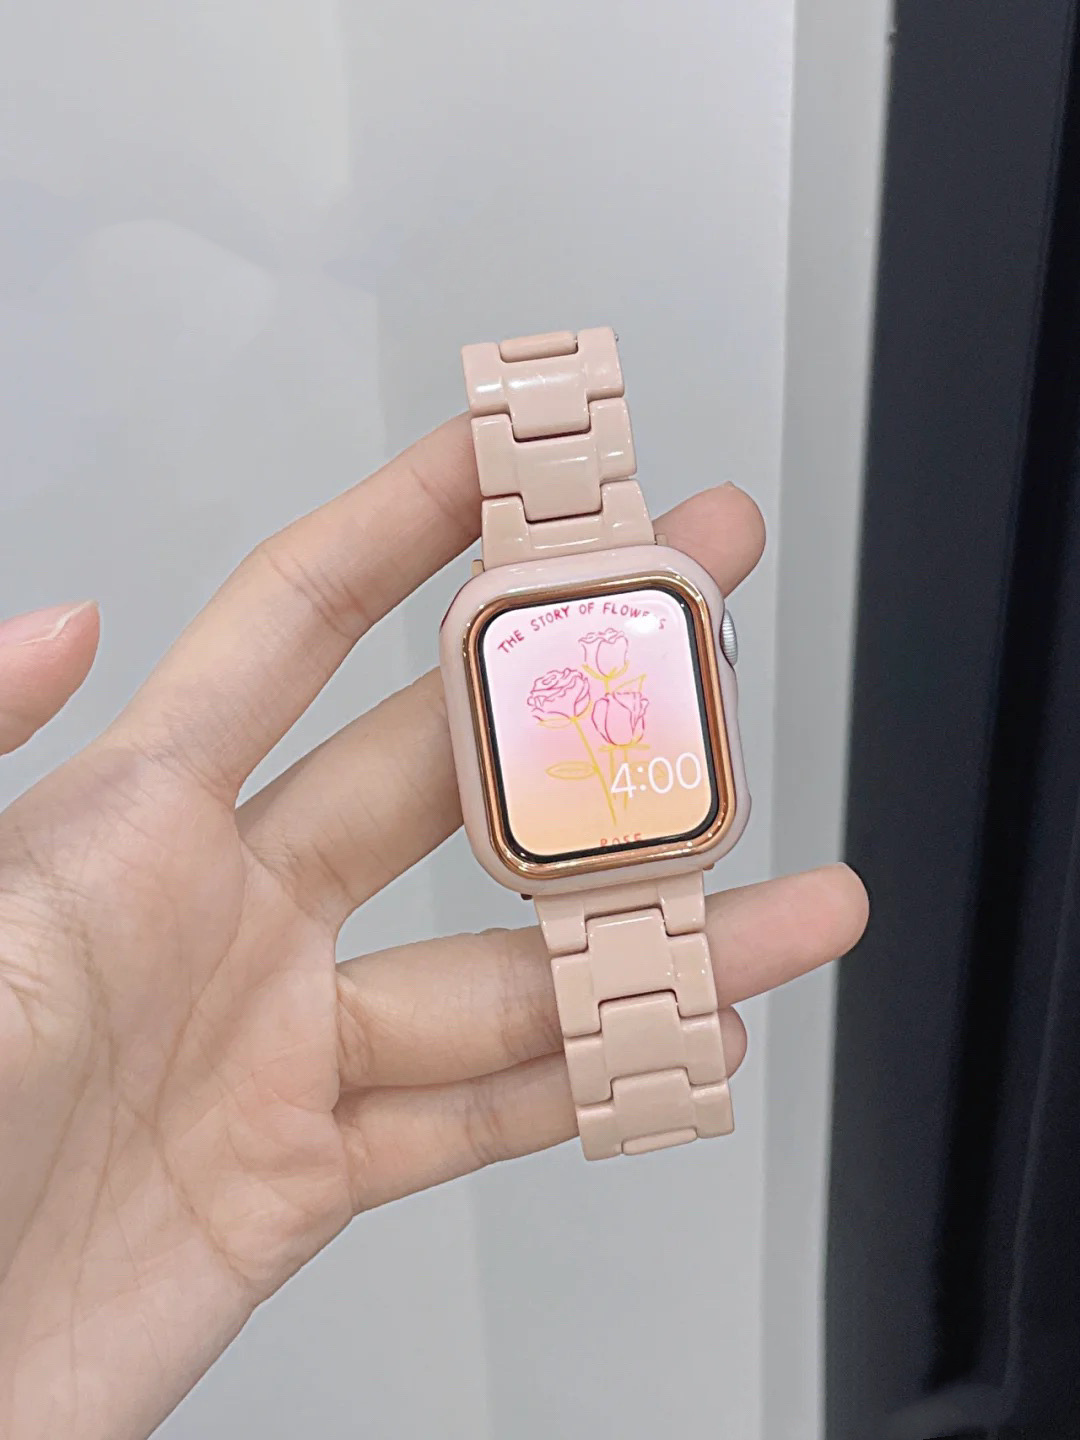 Suitable for Apple watch Apple three res...